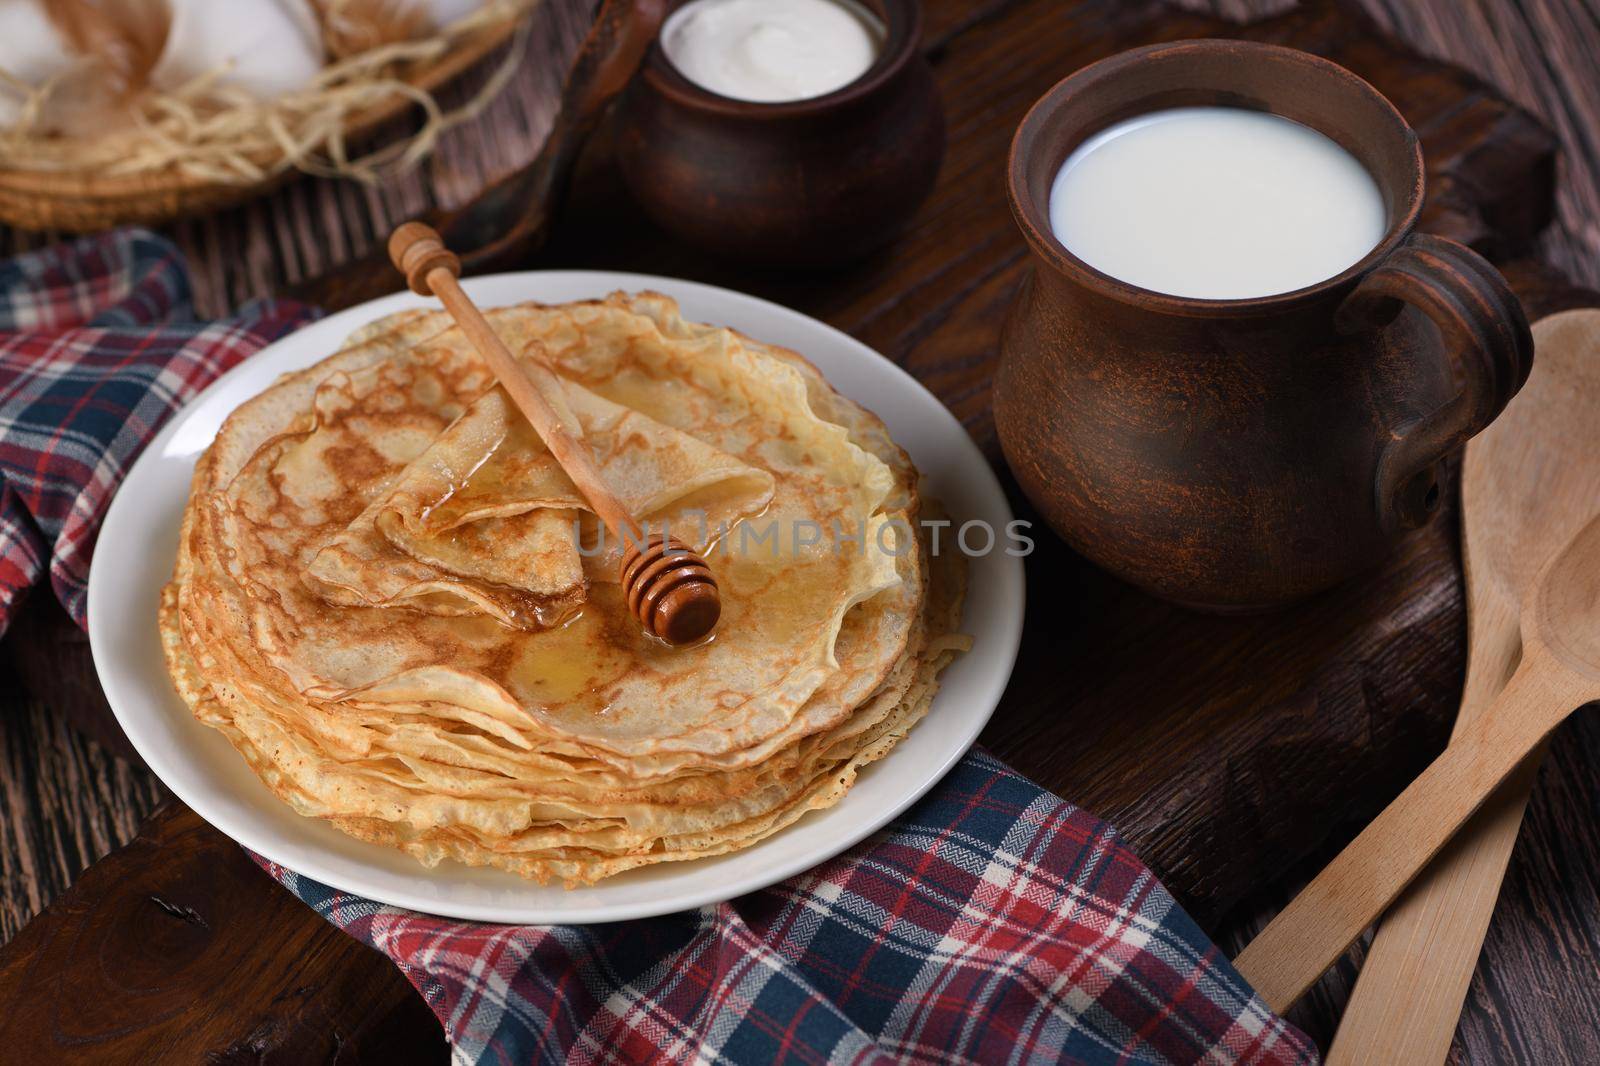 Homemade thin pancakes with honey stacked in a stack, on a wooden table with a mug of milk, a pot of sour cream and eggs in a basket. Traditional Slavonian, pagan holiday (Maslinitsa). Country style food.